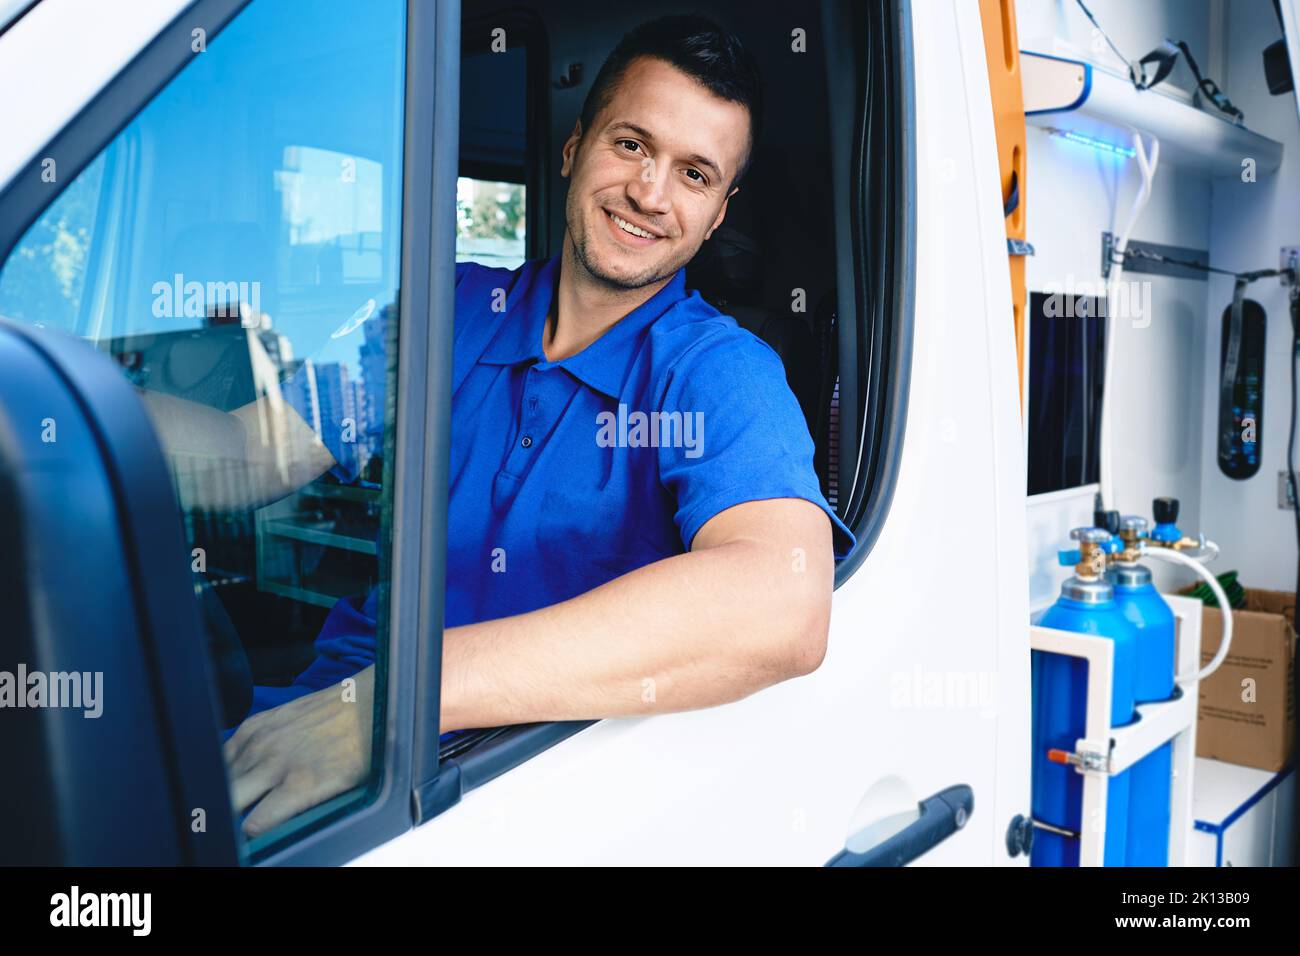 Emergency medical services worker. Portrait of male paramedic sitting inside ambulance Stock Photo